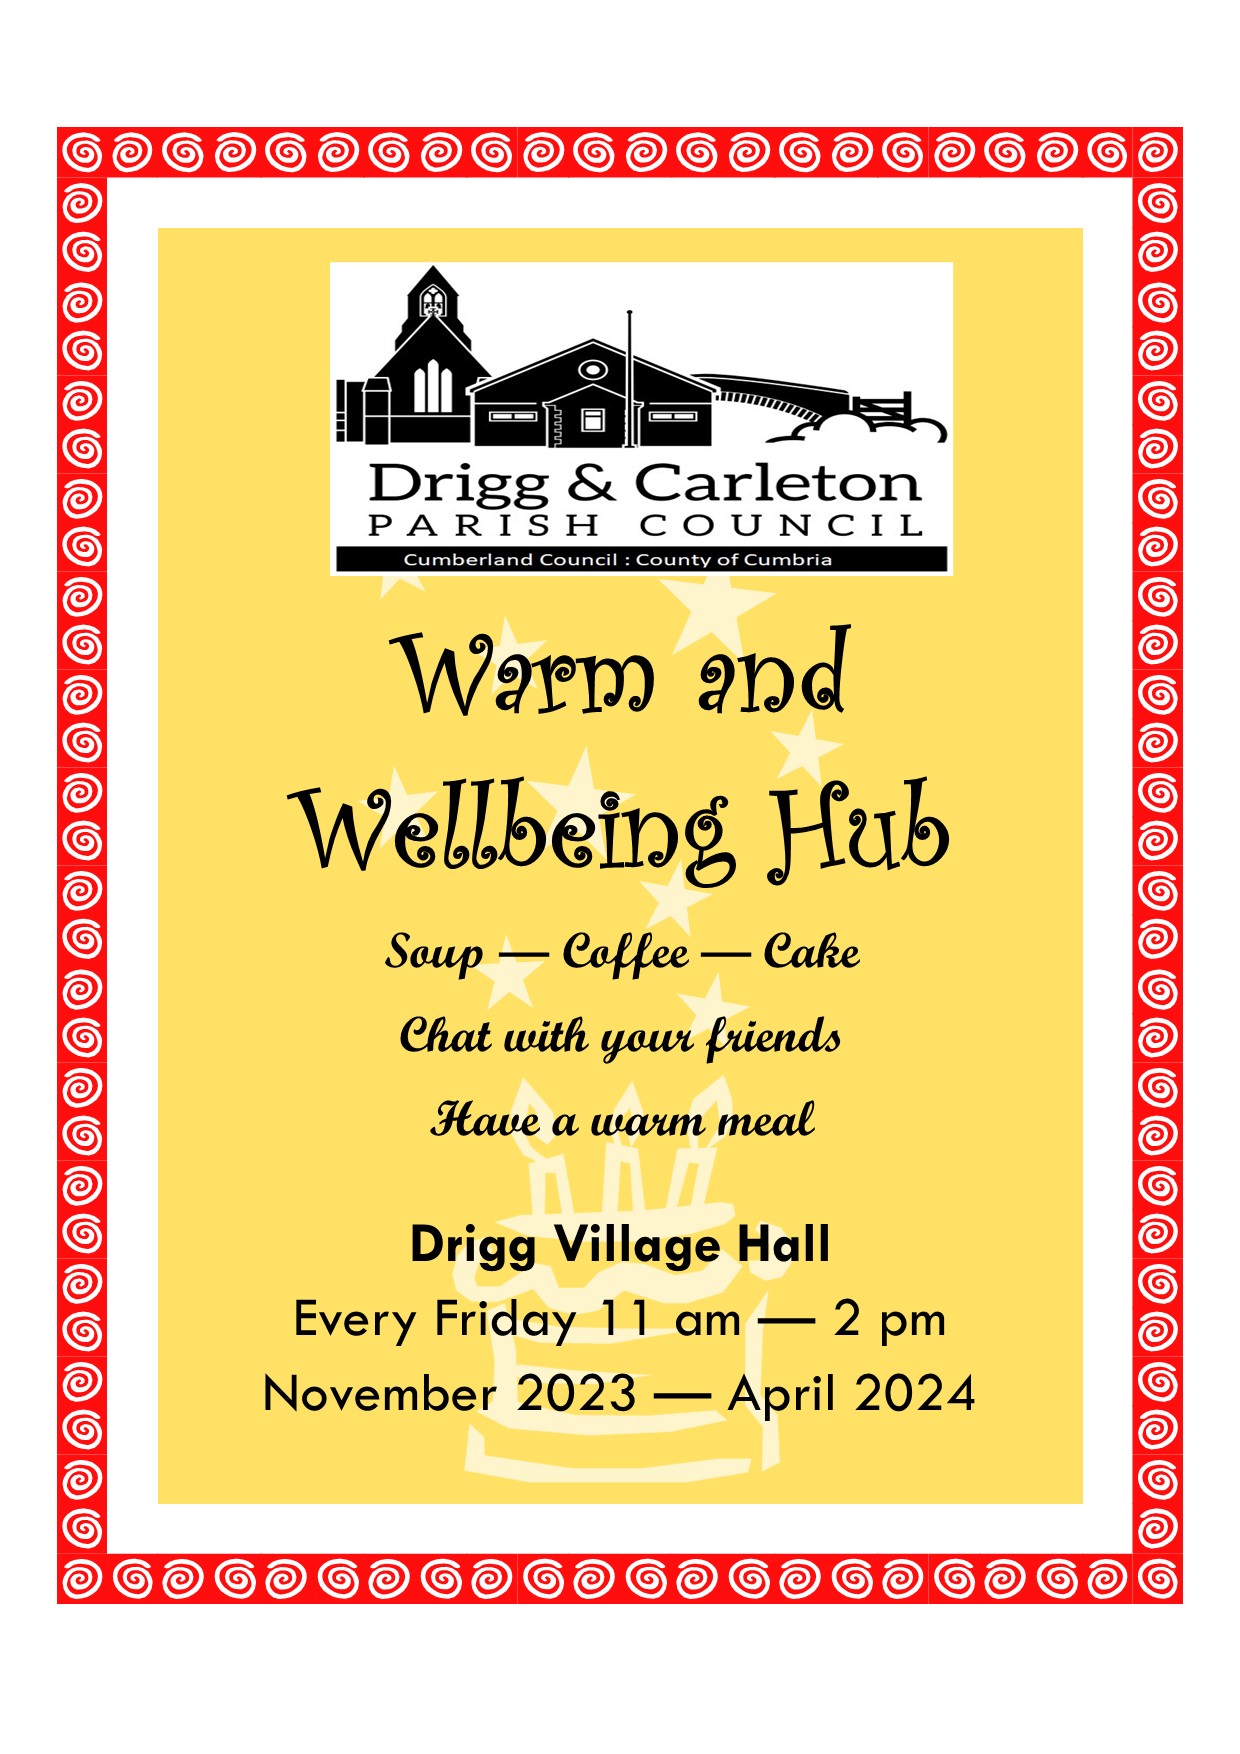 Warm and Wellbeing Hub – 26th April 2024